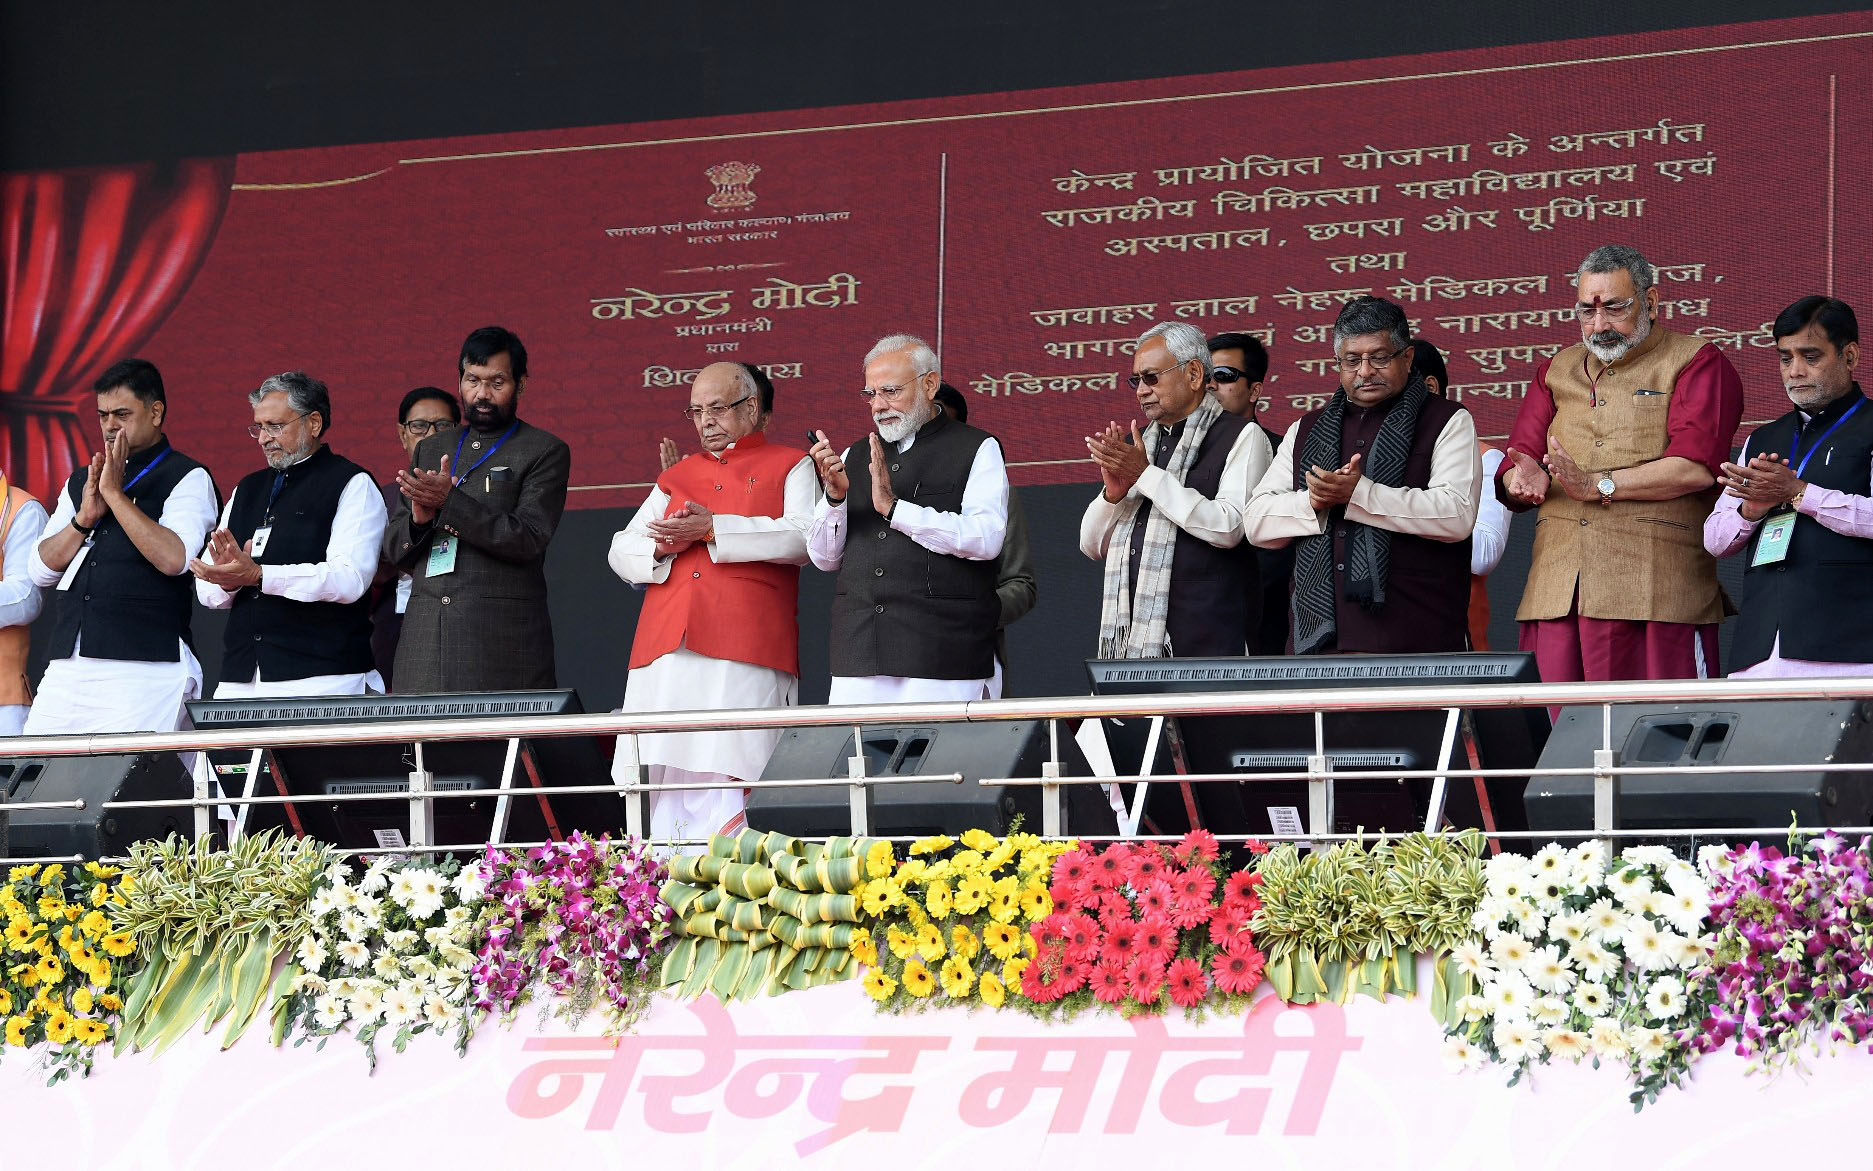 PM unveils development projects worth Rs.33,000 crore for Bihar